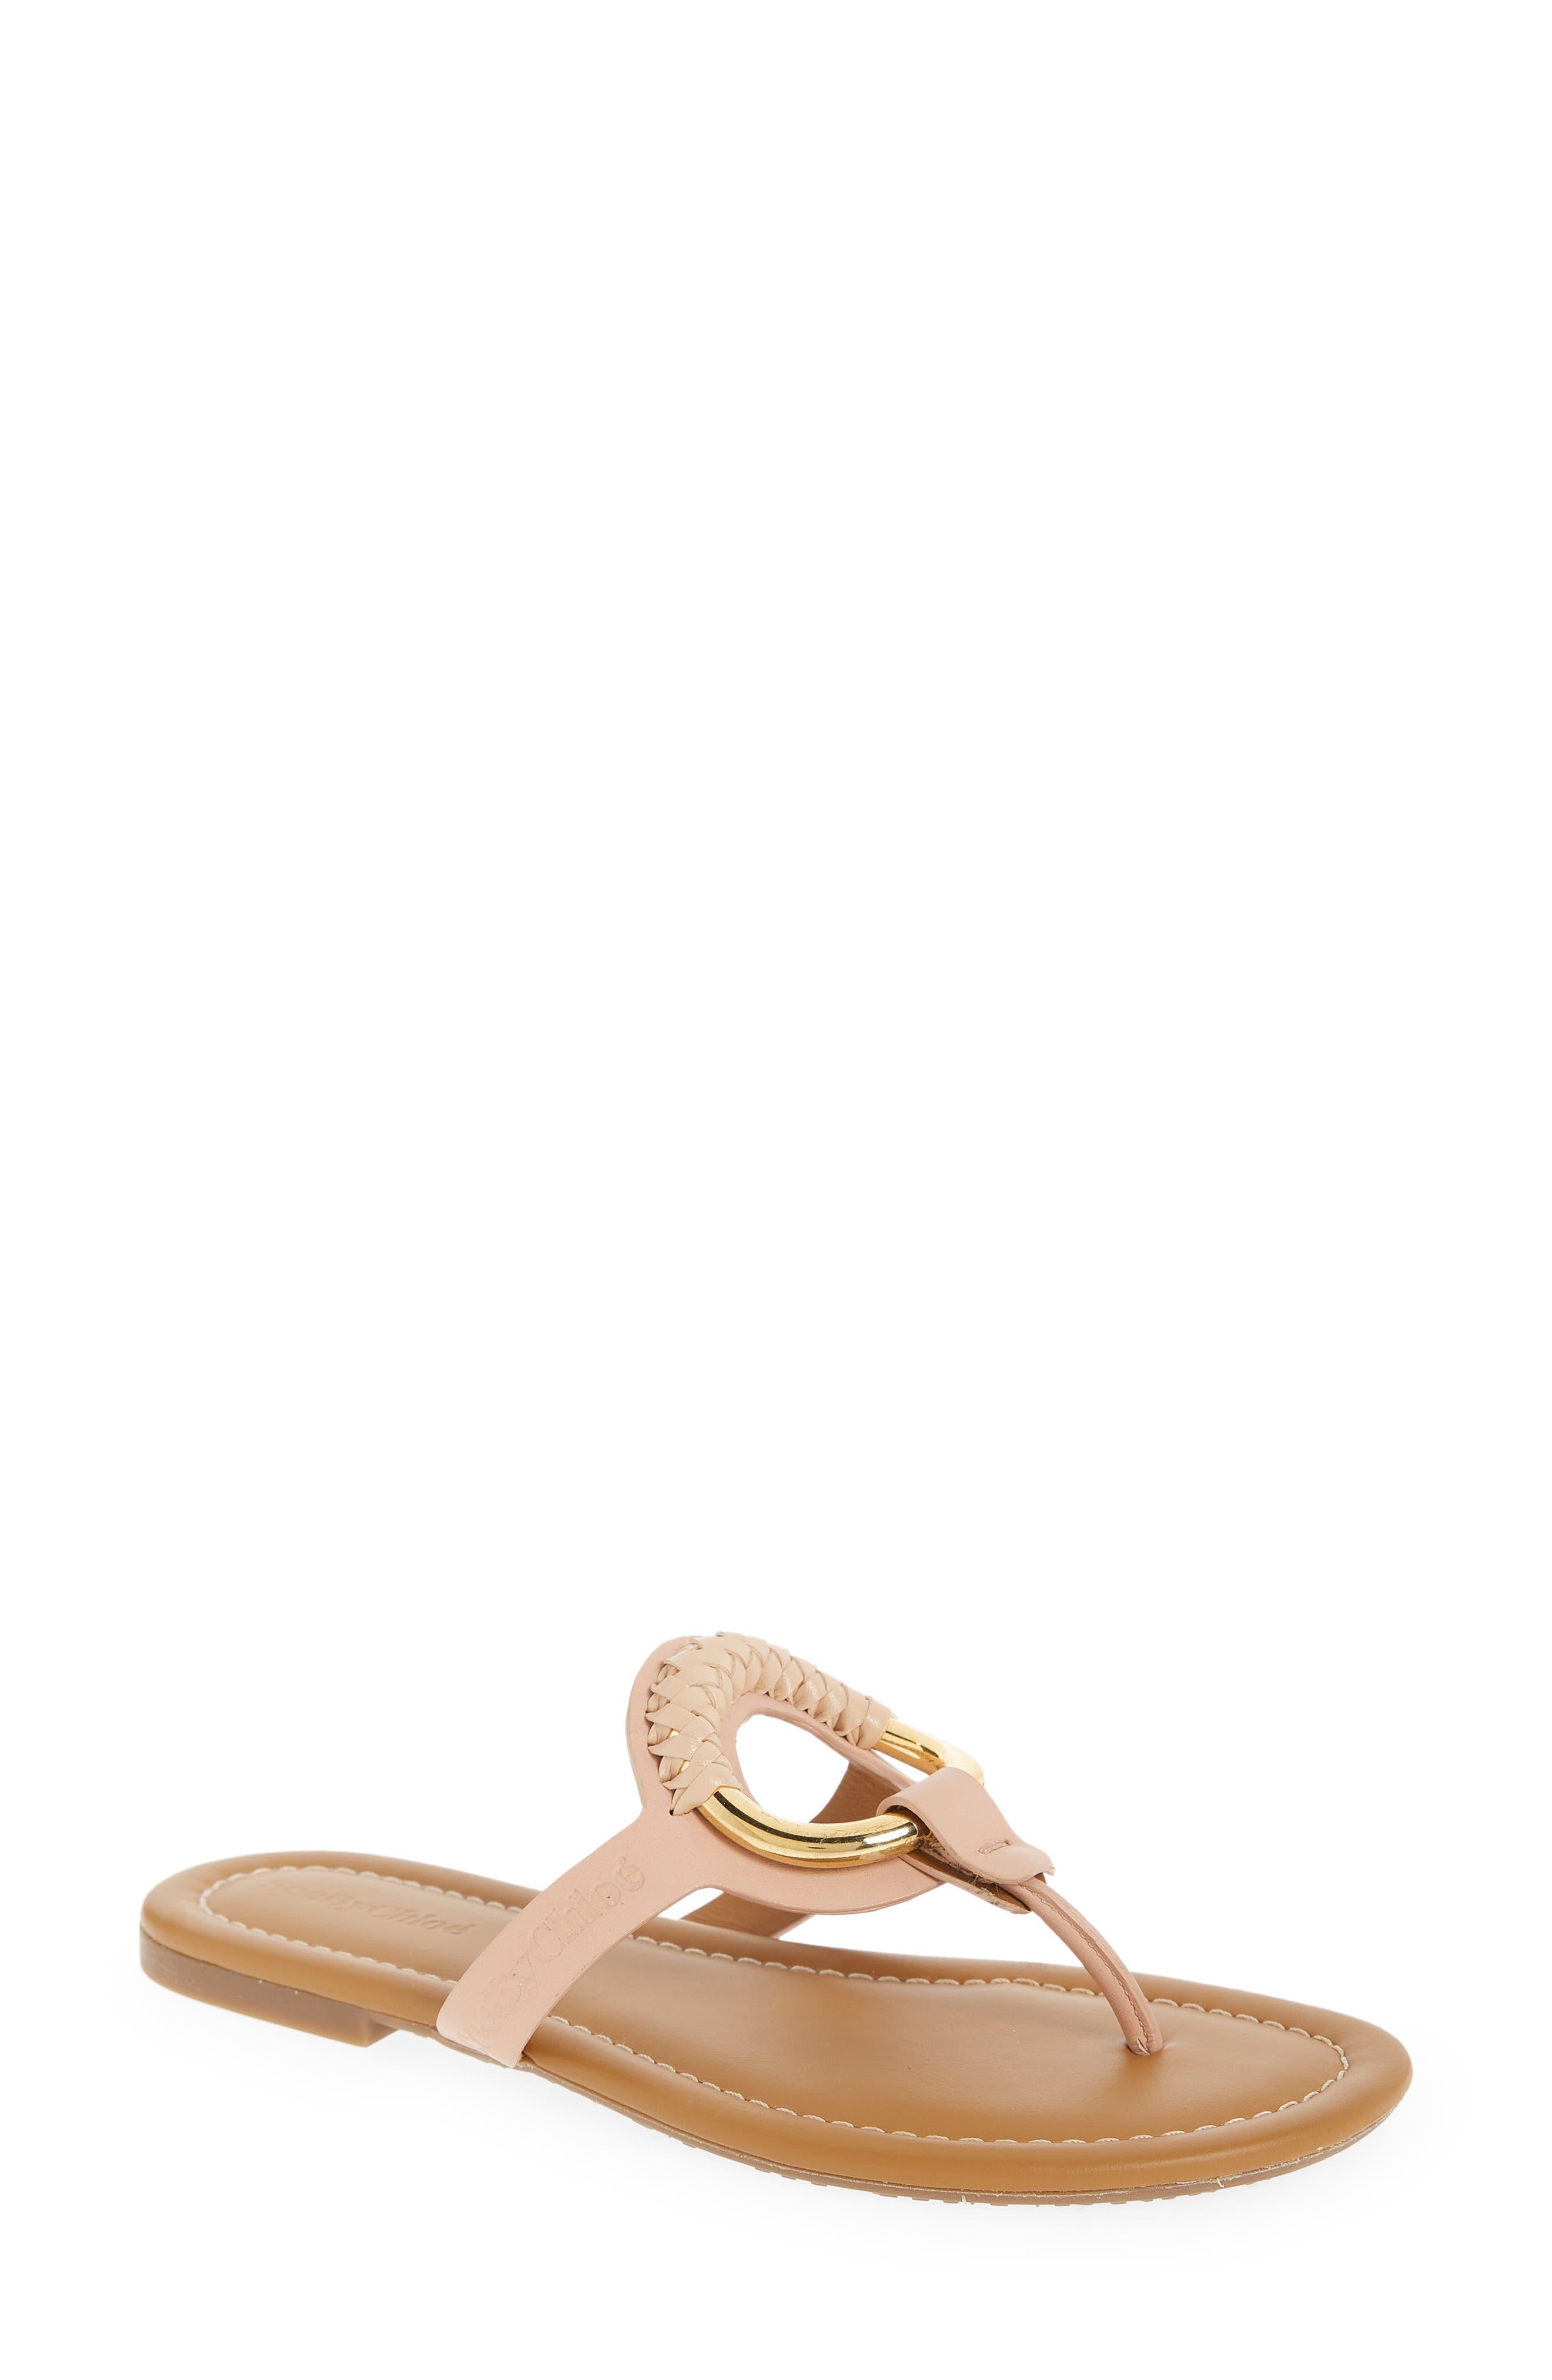 See By Chloé Hana Sandal in Natural | Lyst